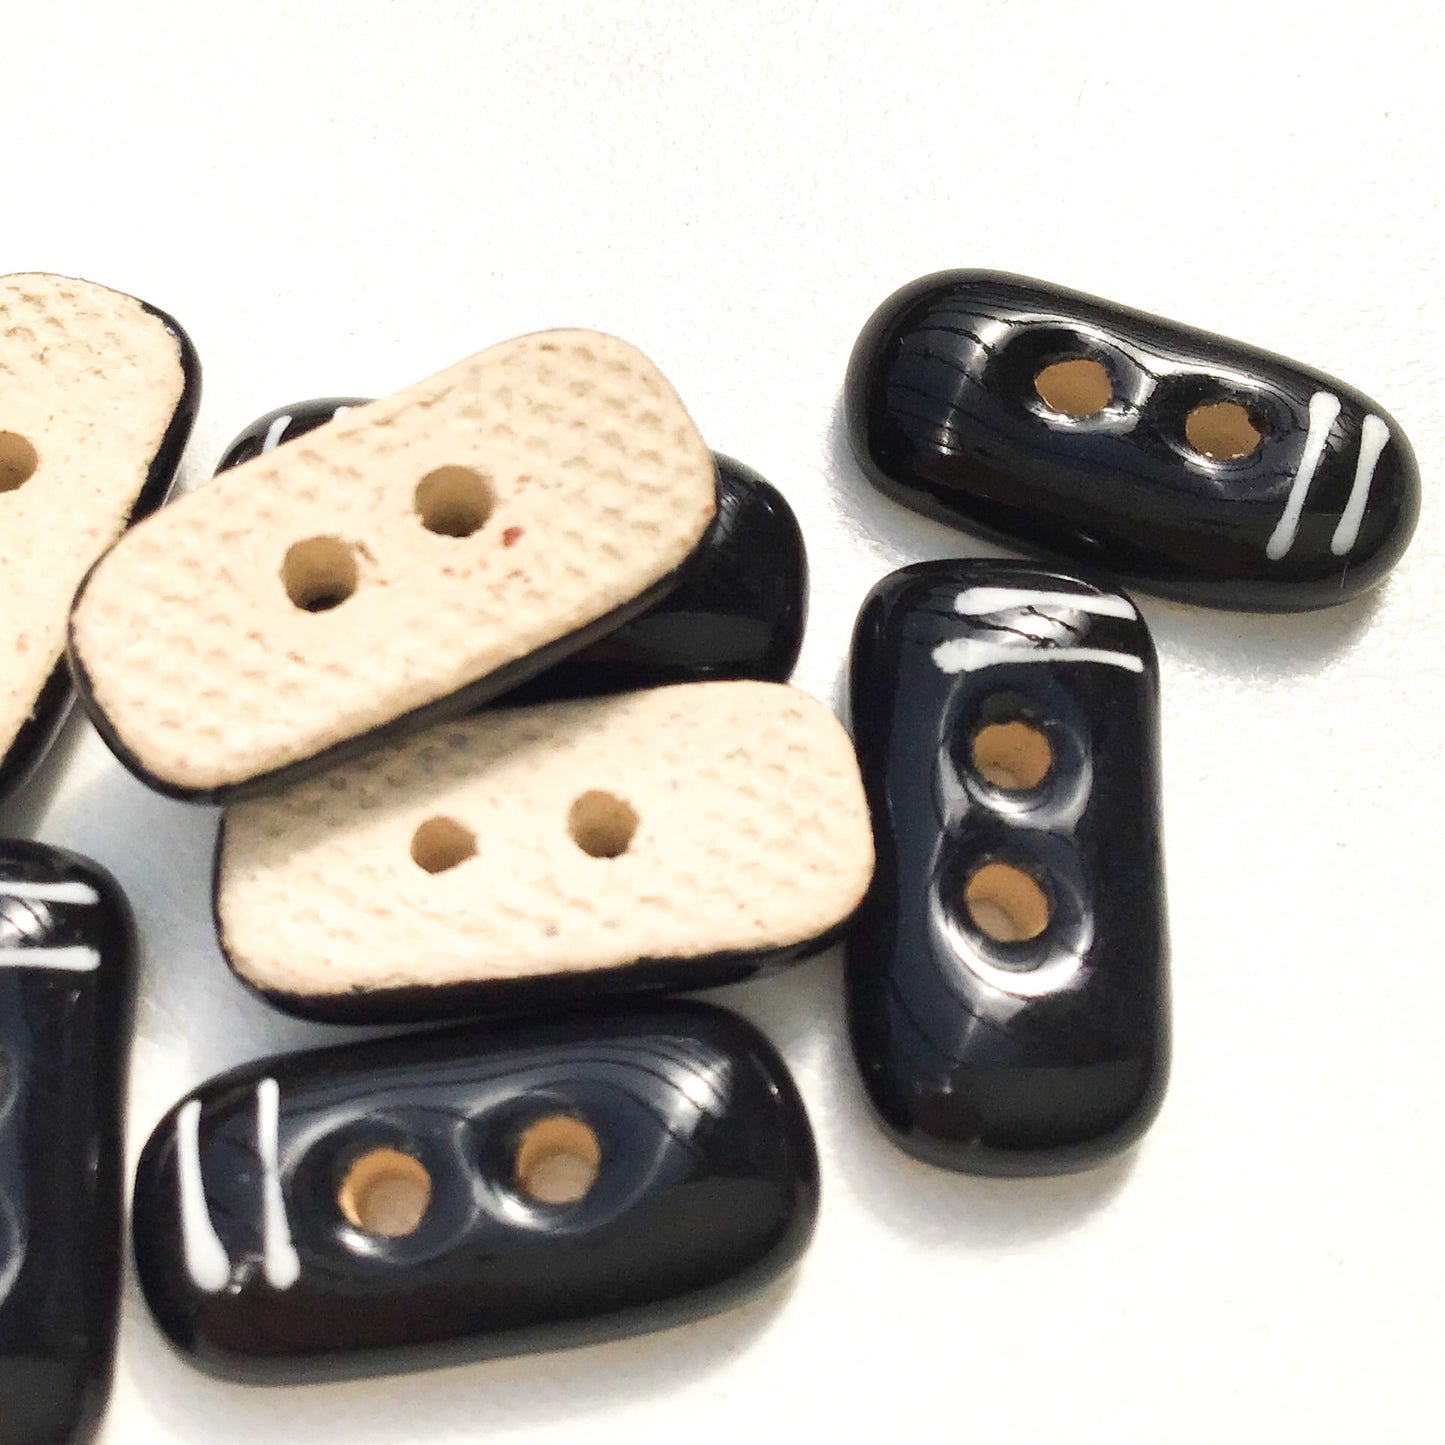 Rectangular Black Ceramic Buttons with White Lines - Black Clay Buttons - 3/8" x 3/4" - 8 Pack